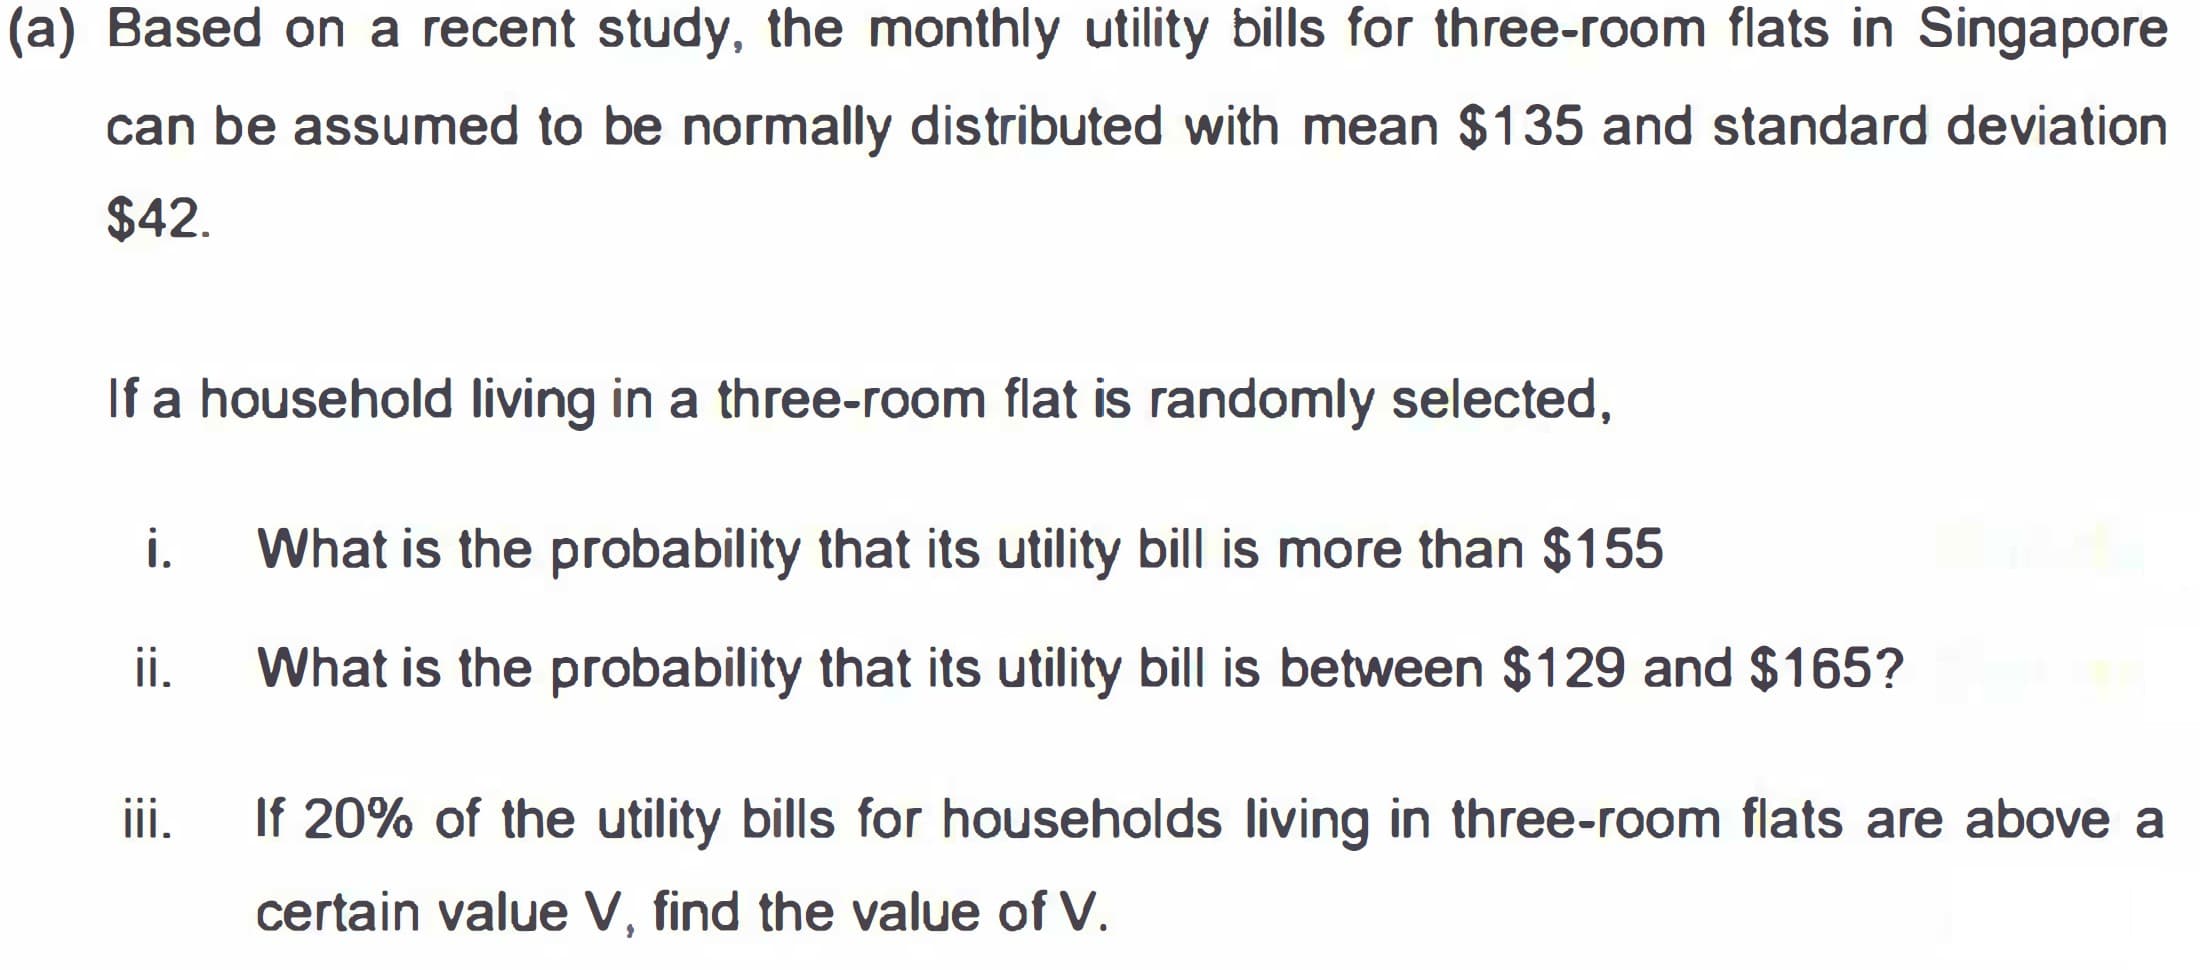 (a) Based on a recent study, the monthly utility bills for three-room flats in Singapore
can be assumed to be normally distributed with mean $135 and standard deviation
$42.
If a household living in a three-room flat is randomly selected,
i.
What is the probability that its utility bill is more than $155
ii.
What is the probability that its utility bill is between $129 and $165?
ii.
If 20% of the utility bills for households living in three-room flats are above a
certain value V, find the value of V.
